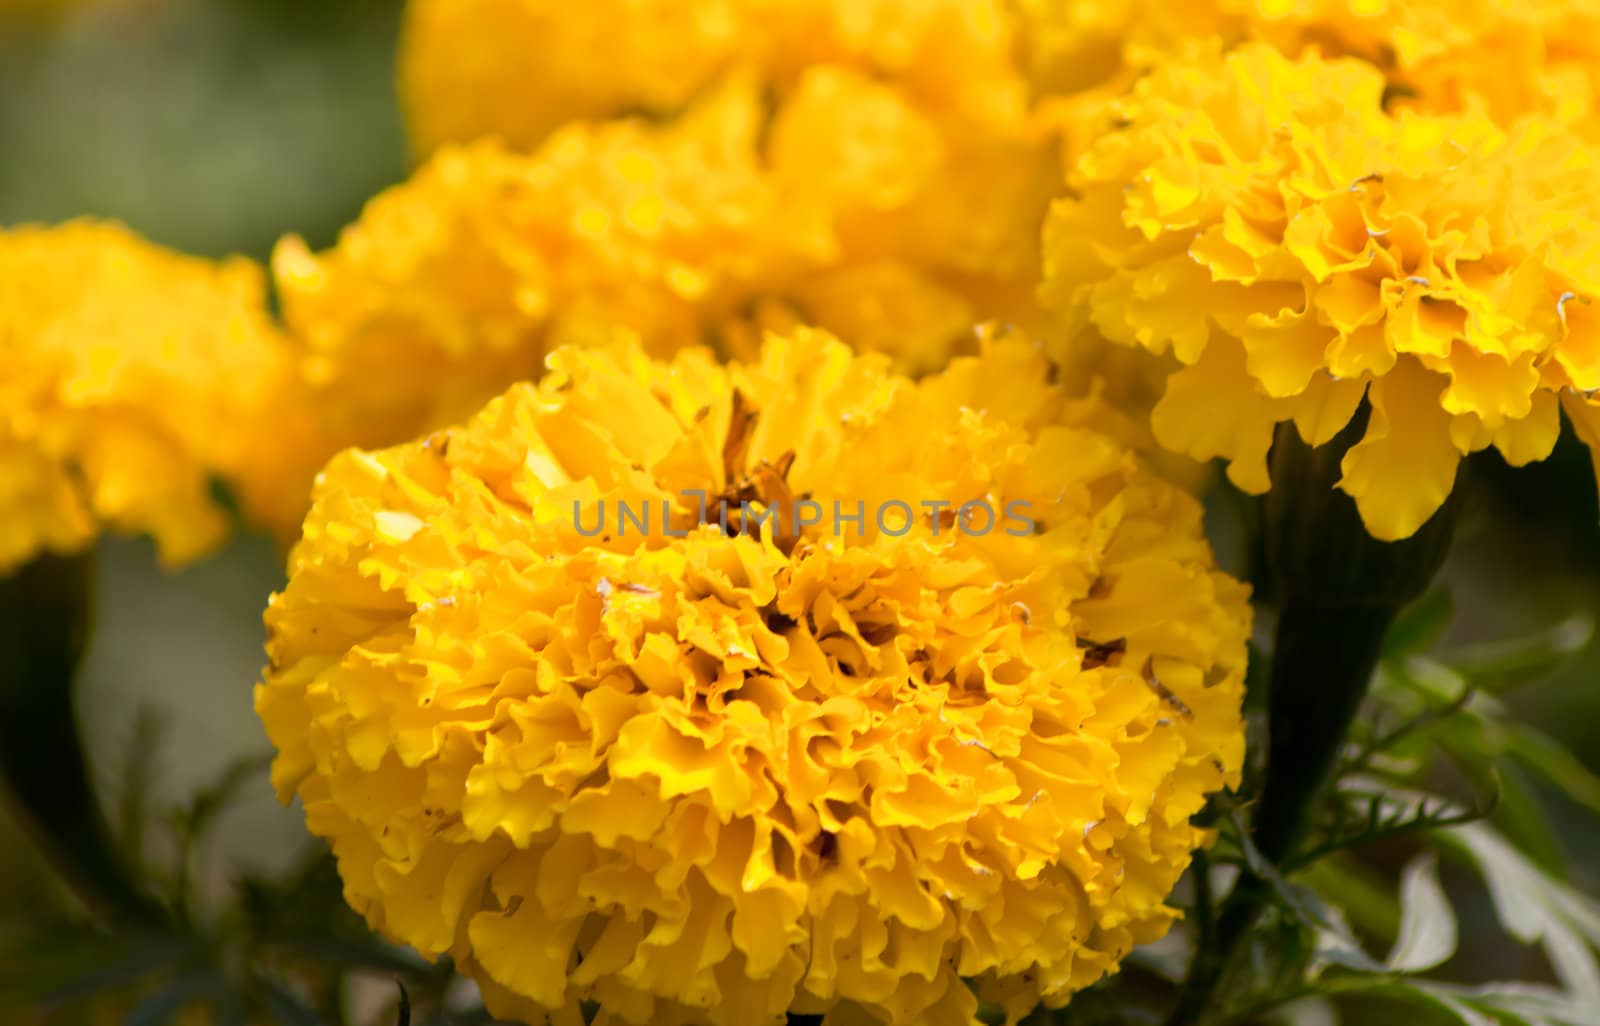 Marigold flowers by nikky1972